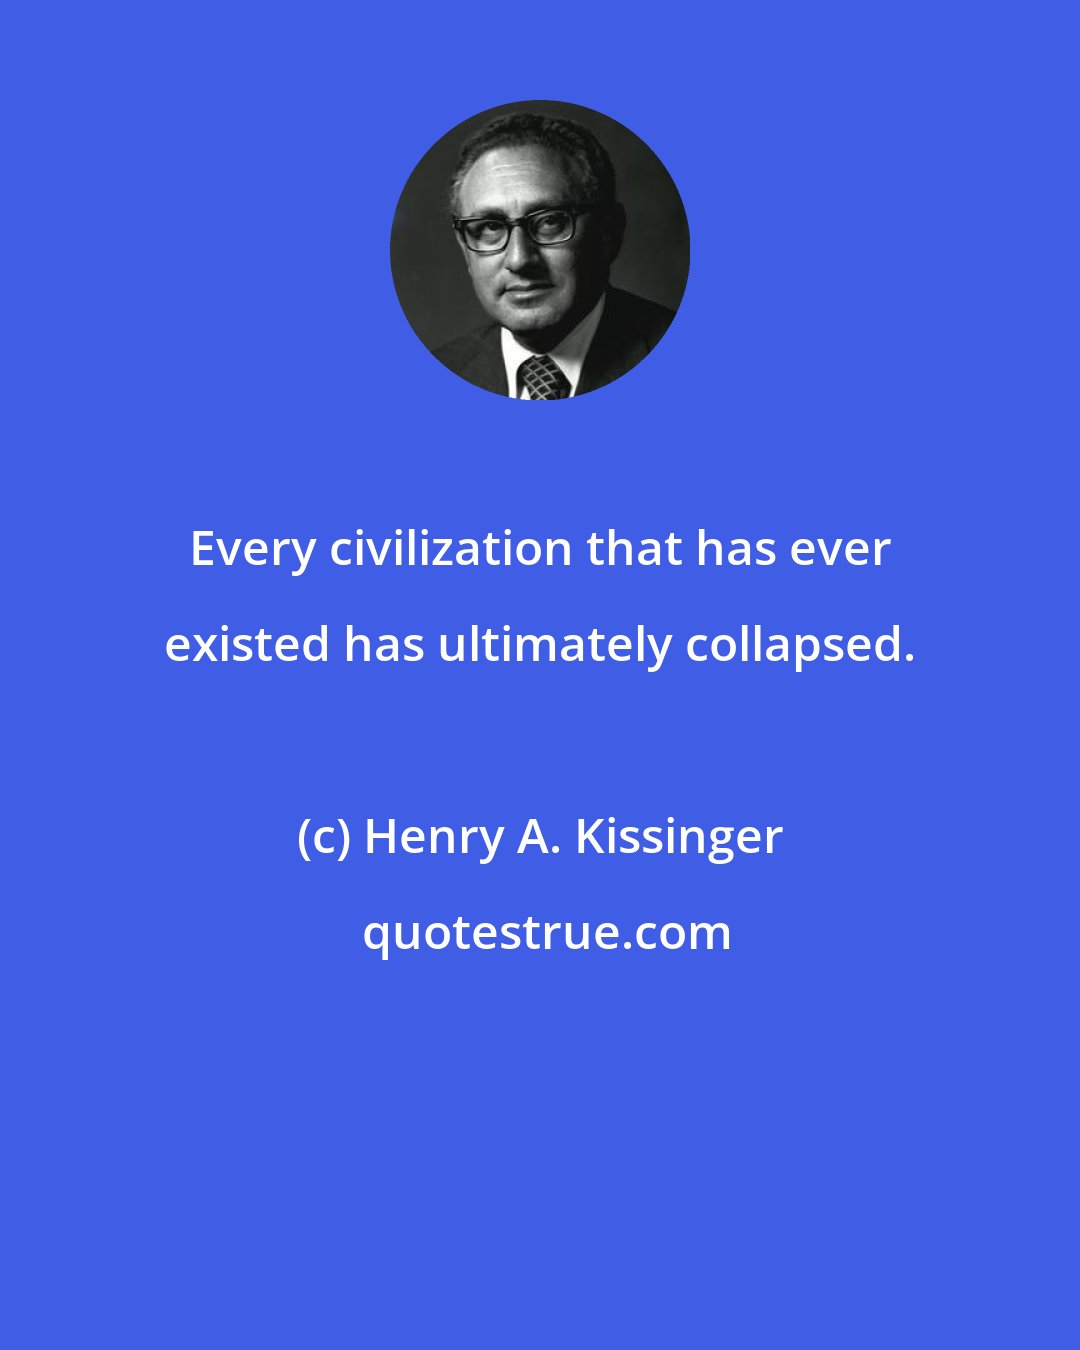 Henry A. Kissinger: Every civilization that has ever existed has ultimately collapsed.